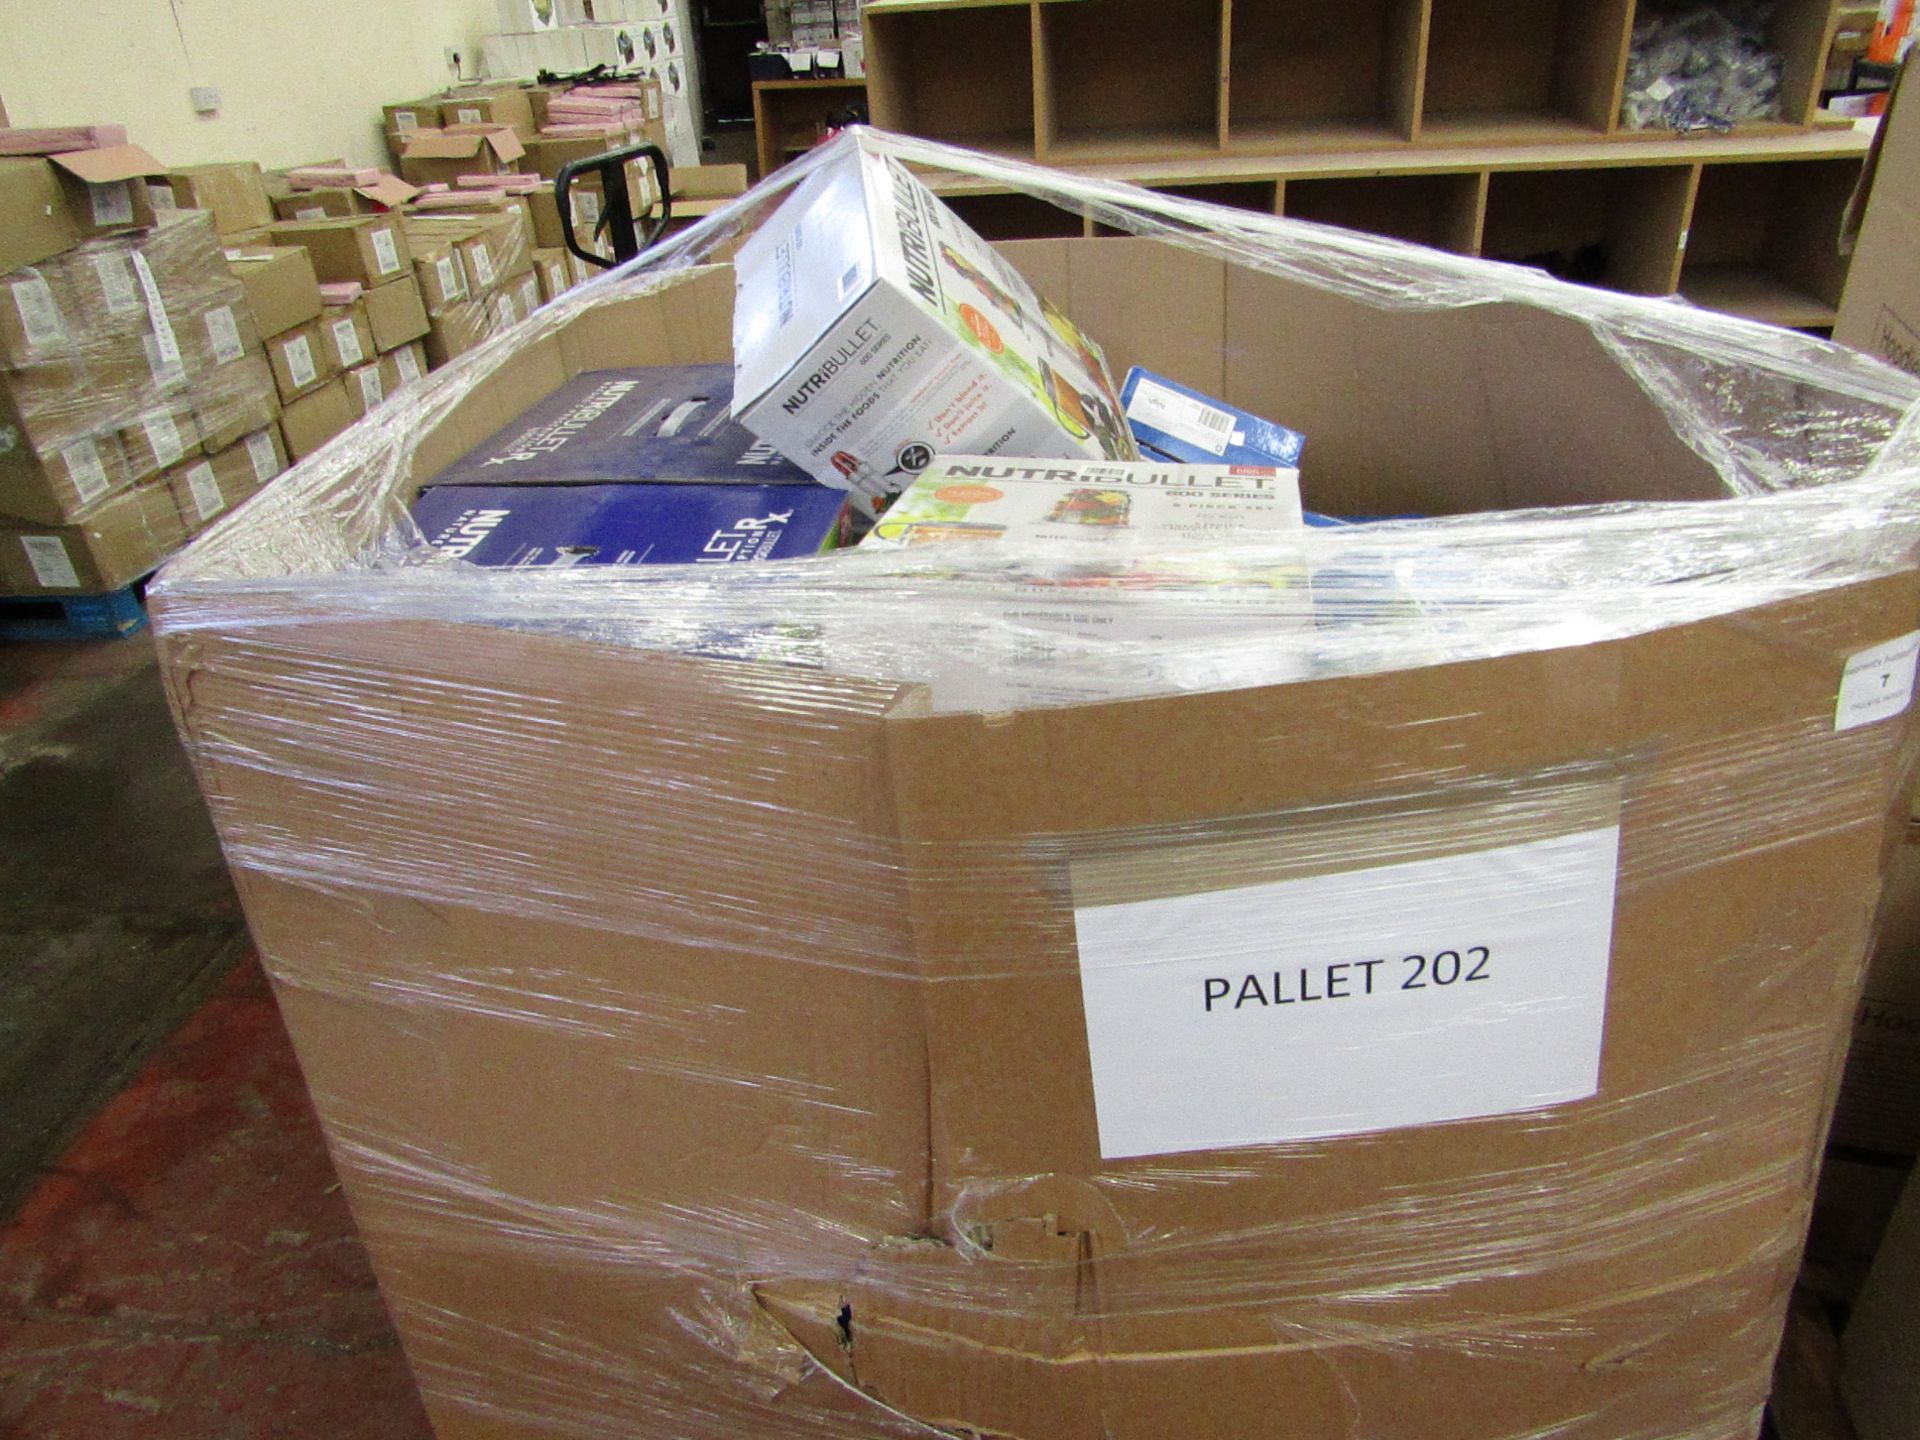 | APPROX 75X | THE PALLET CONTAINS XHOSES, NUTRI BULLET RX'S AND MORE | BOXED AND UNCHECKED | NO